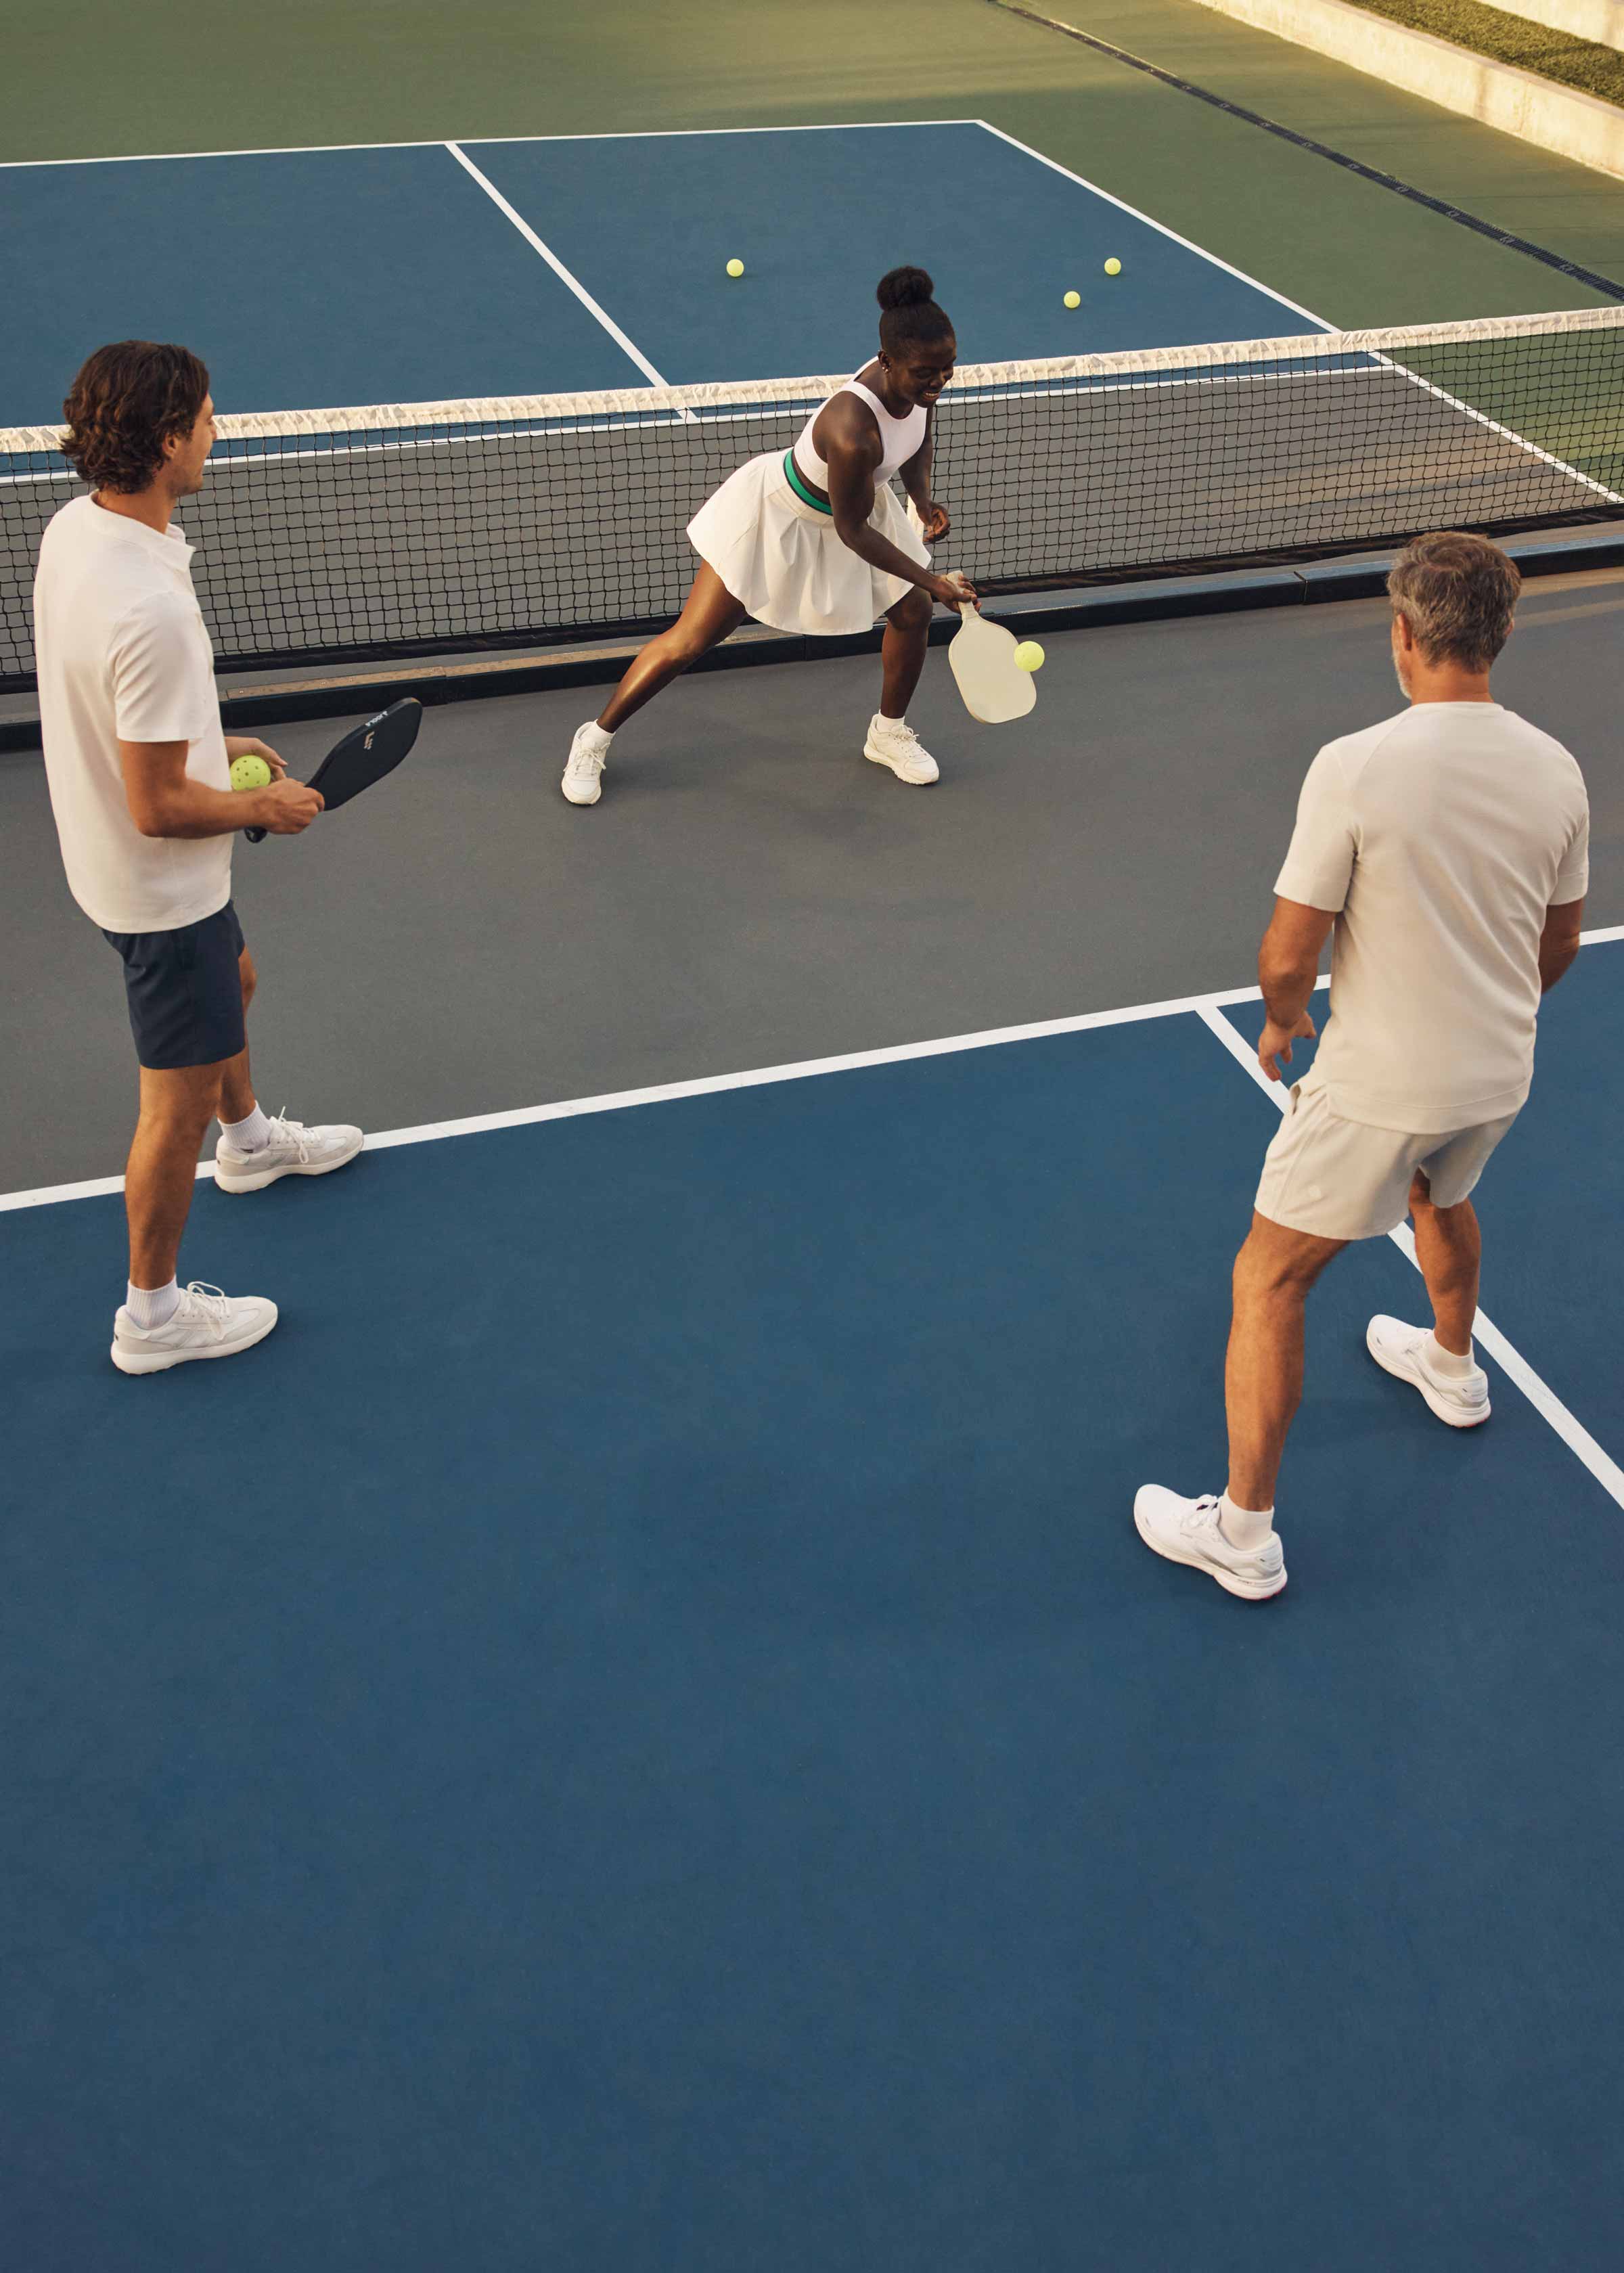 Three pickleball players working on their technique on a Life Time court